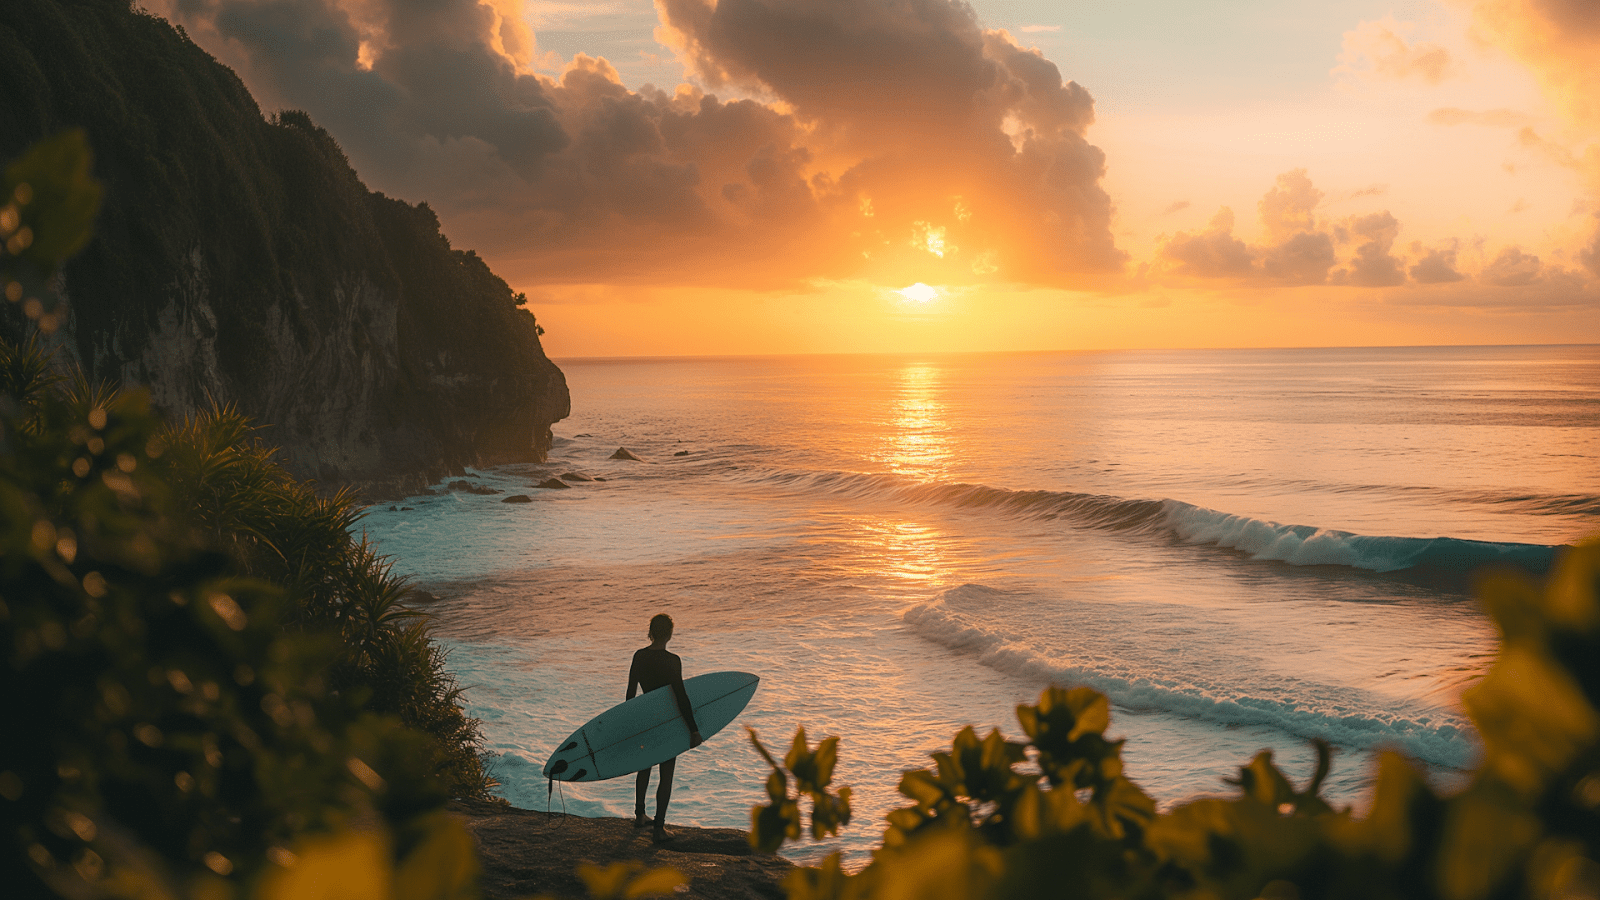 Enjoy breathtaking sunsets on the beach as Bali is a certified surfer’s paradise.